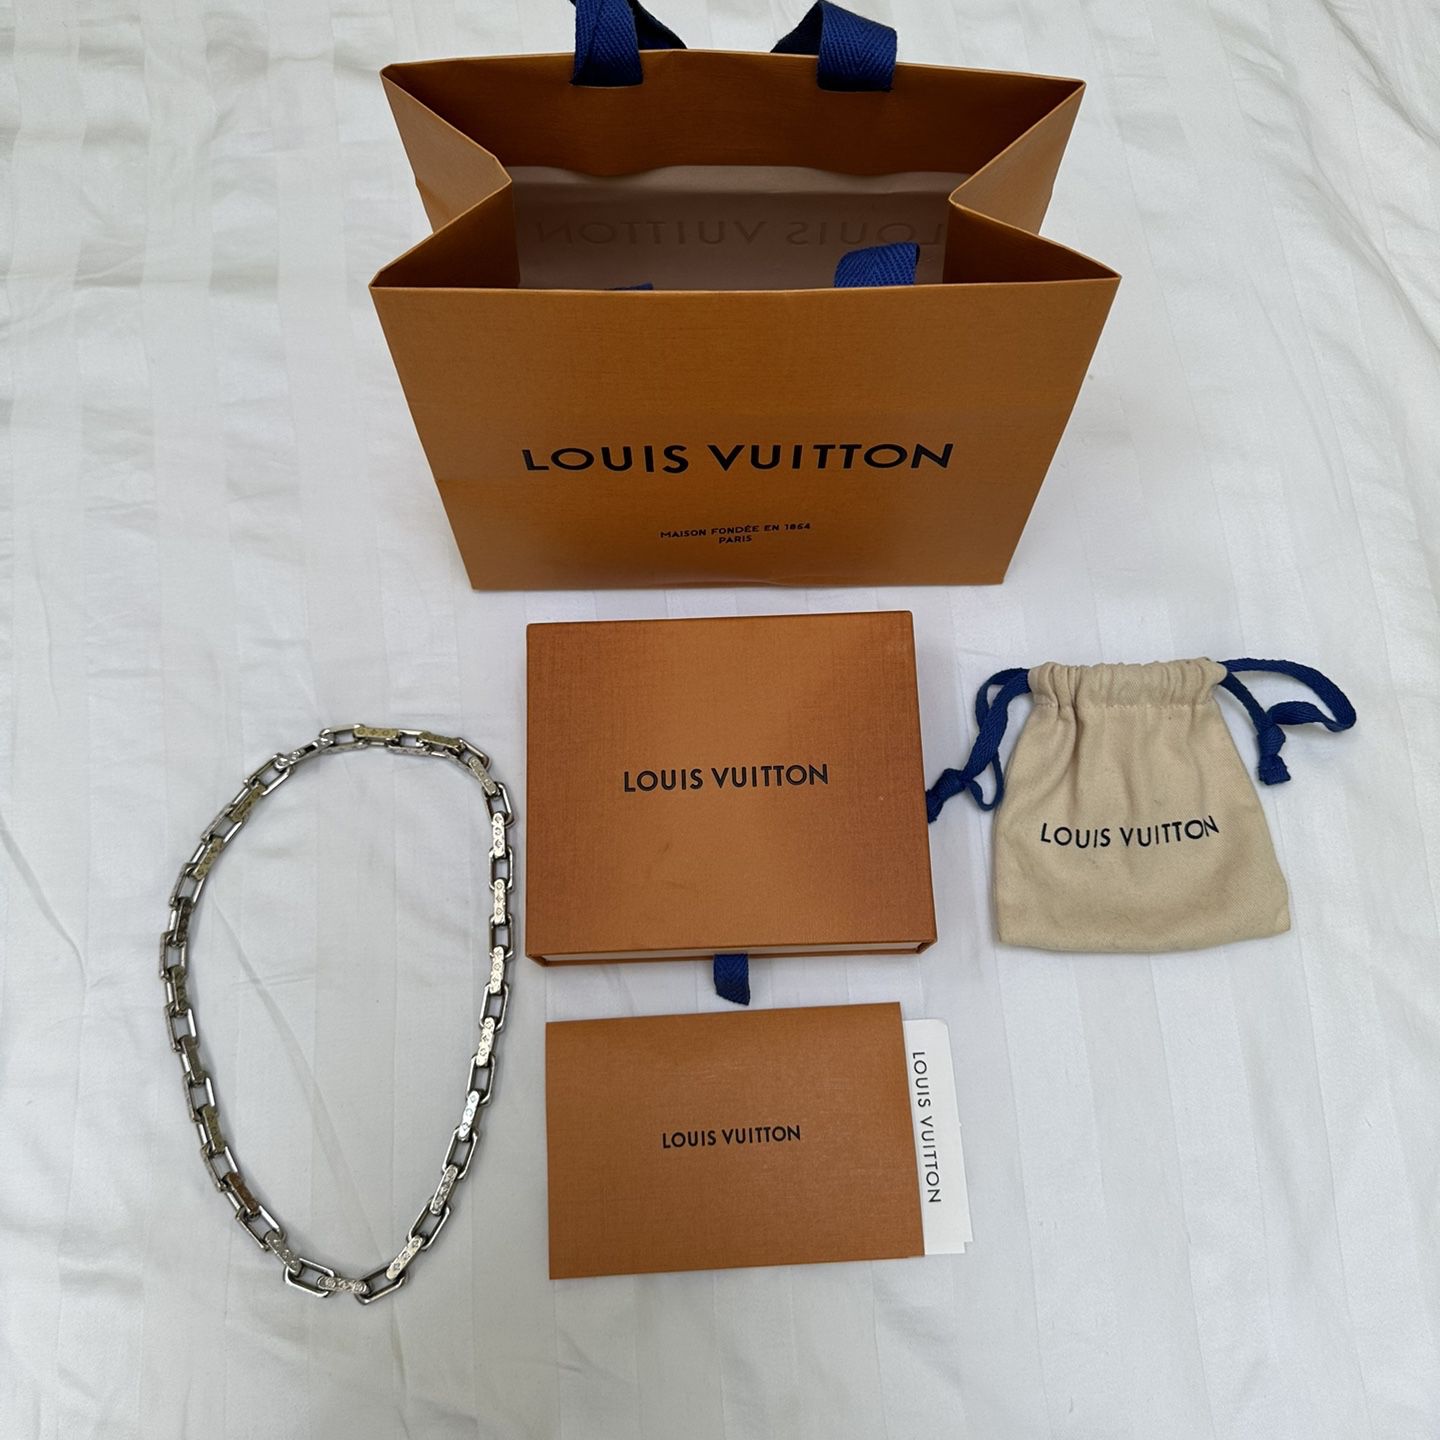 Louis Vuitton Monogram Chain Necklace for Sale in Hicksville, NY